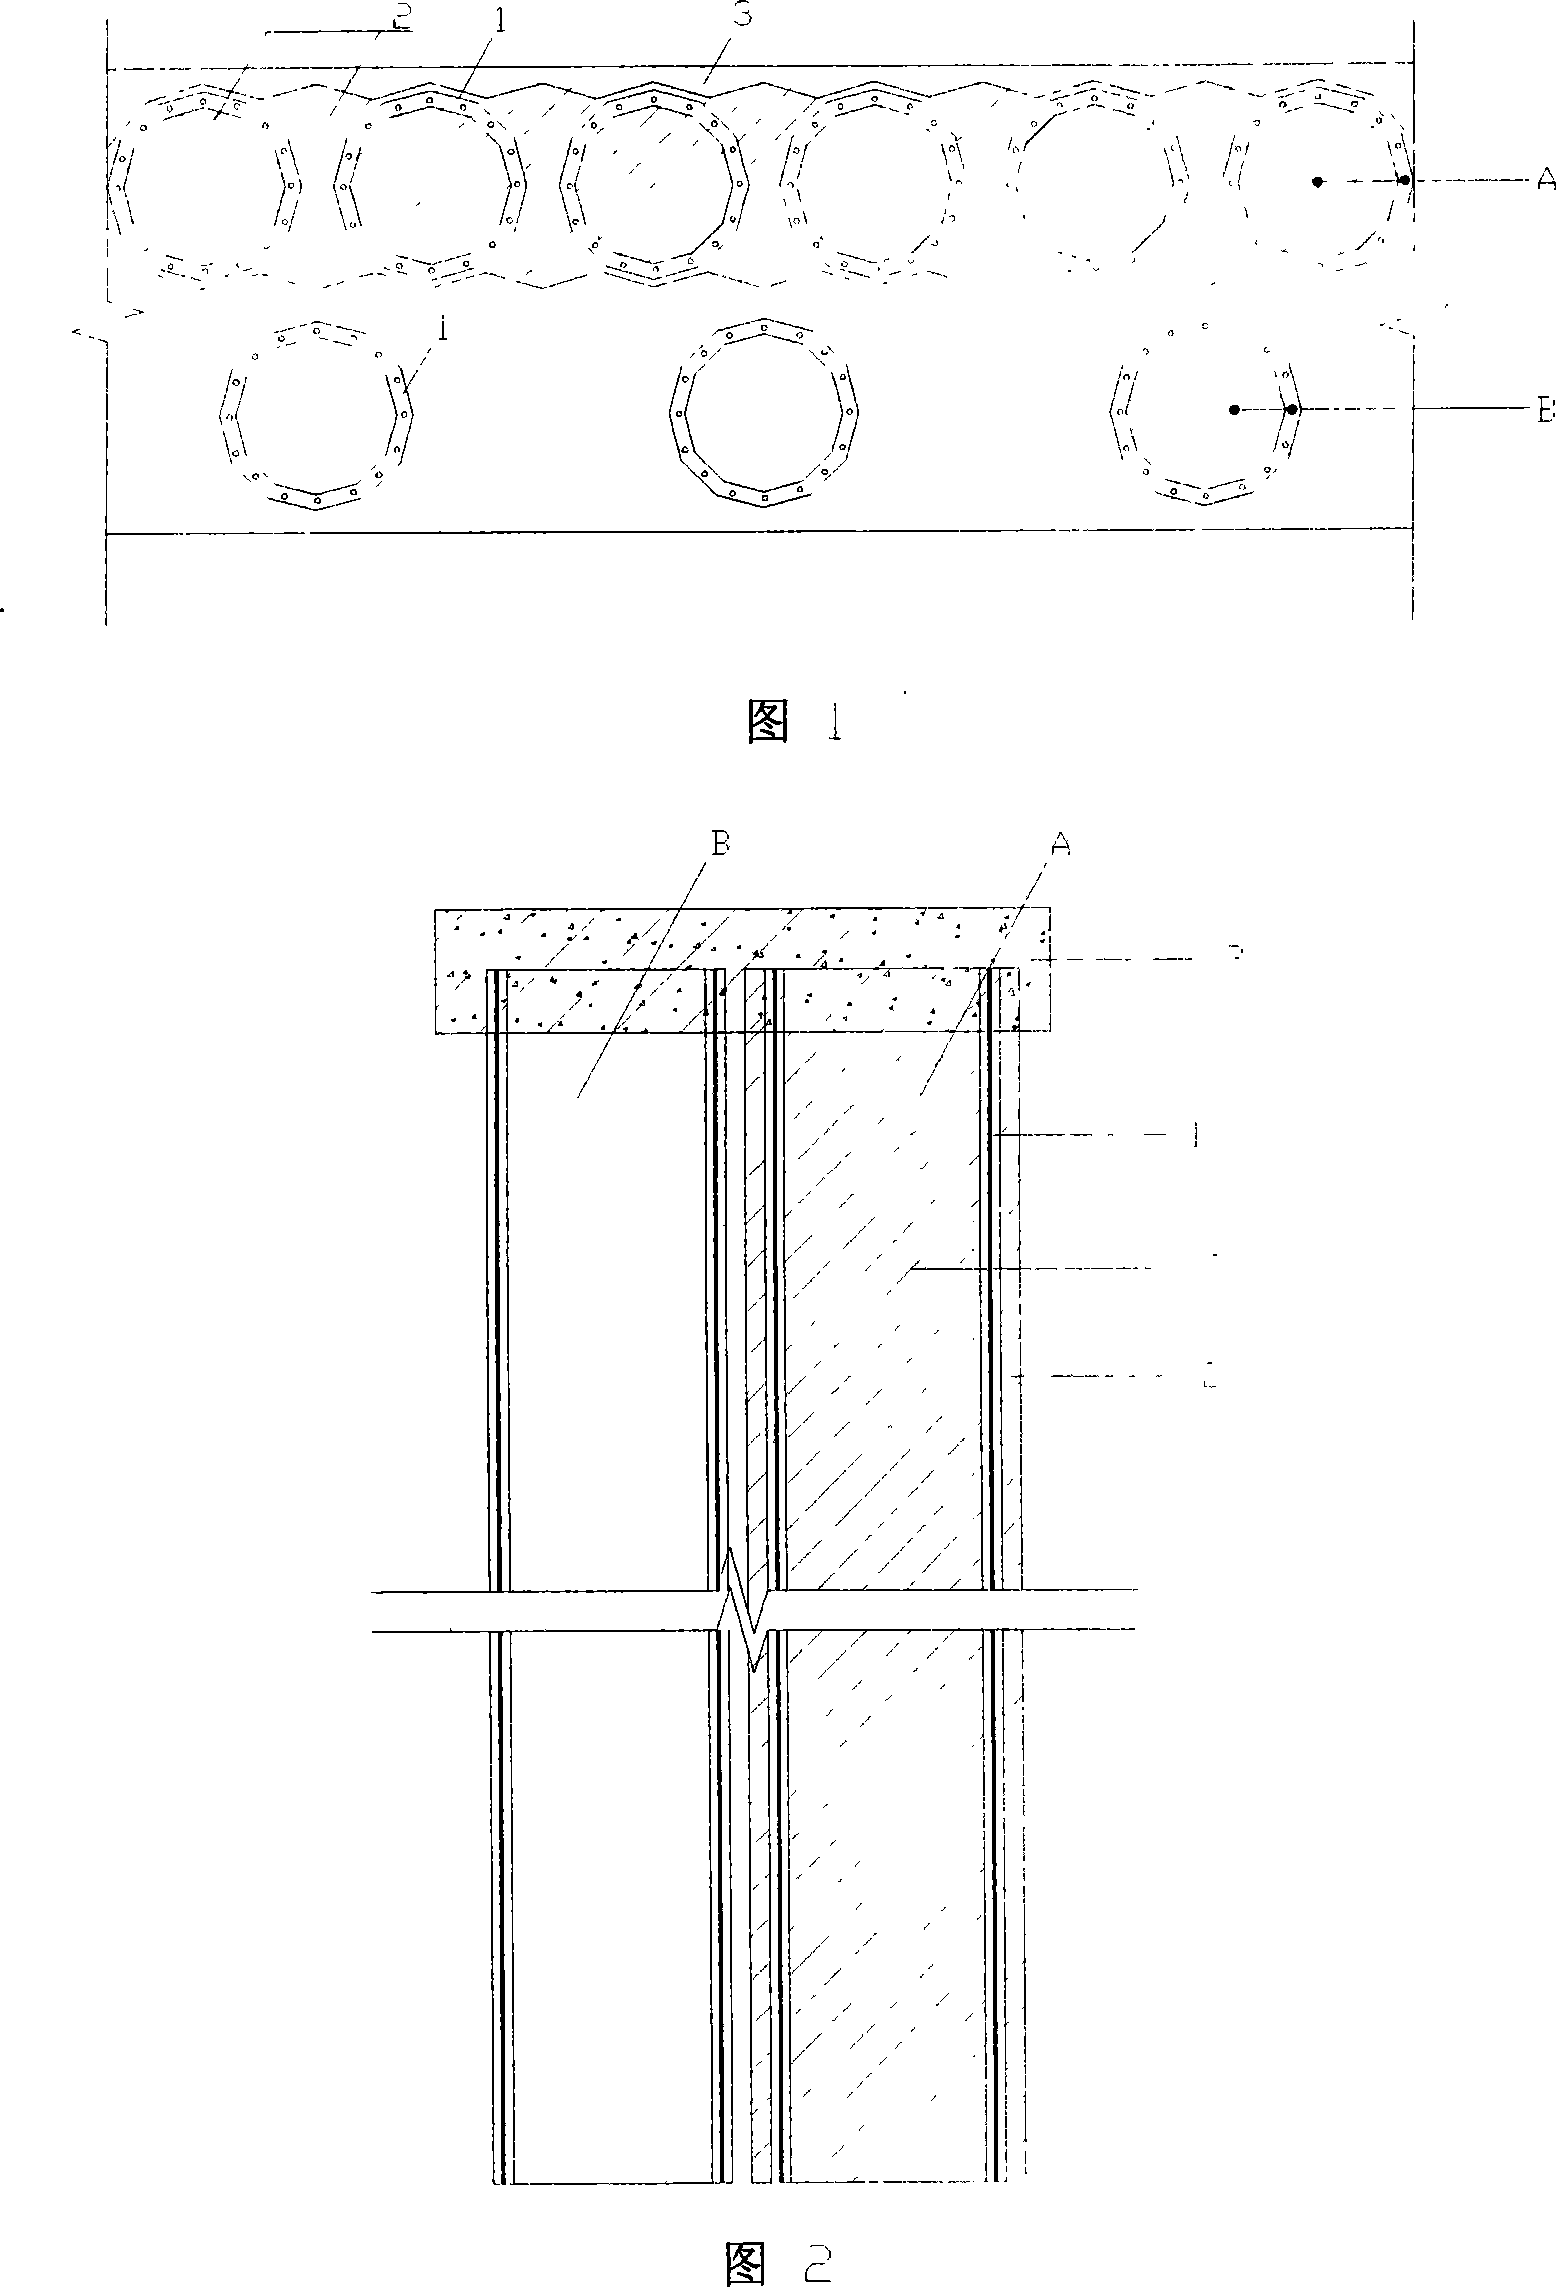 Prefabricated prestressing pipe pile composite supporting wall structure